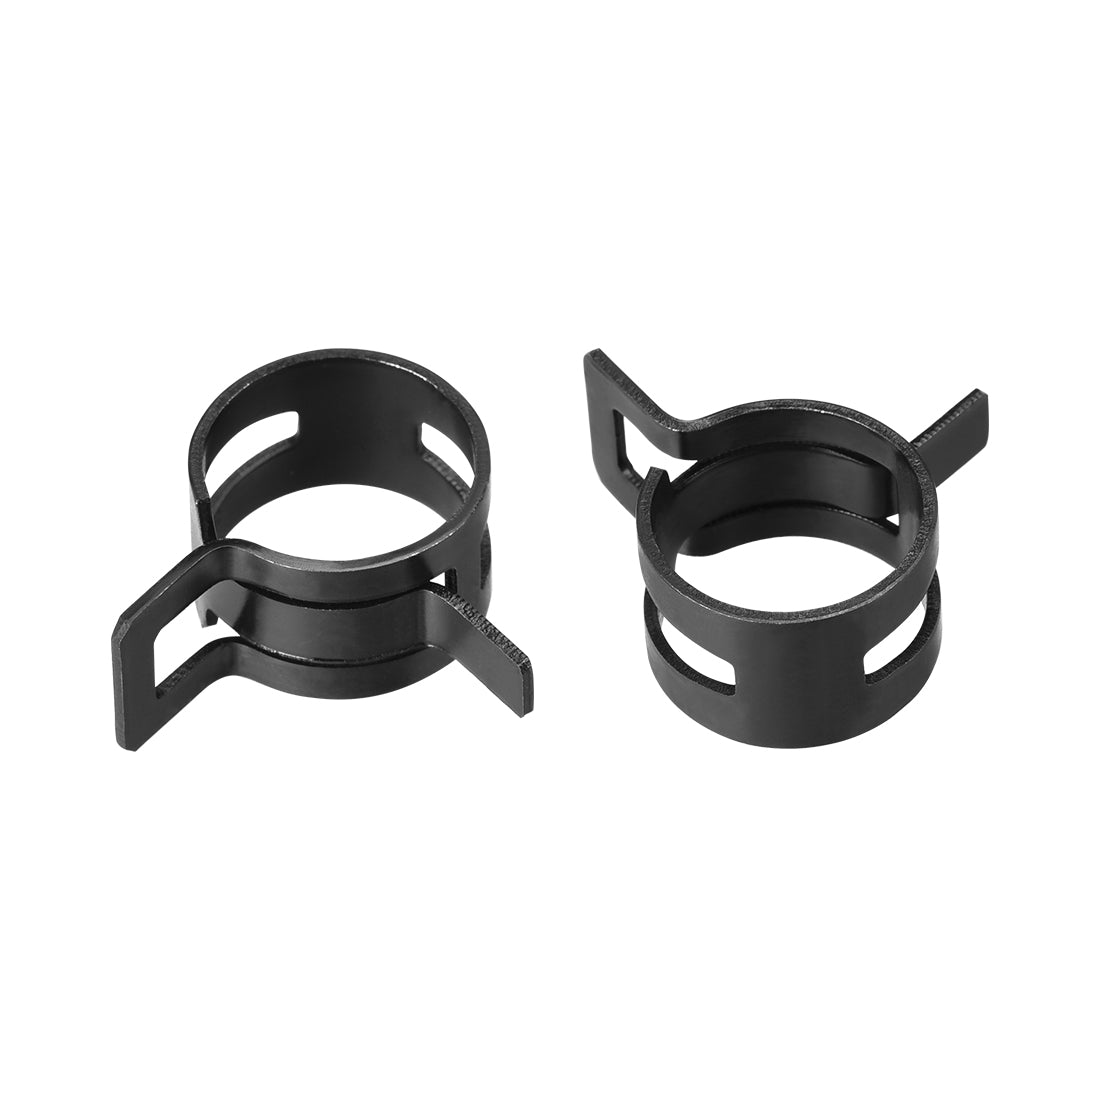 Uxcell Uxcell Steel Band Clamp 9mm for Fuel Line Silicone Hose Tube Spring Clips Clamp Black Manganese Steel 30Pcs